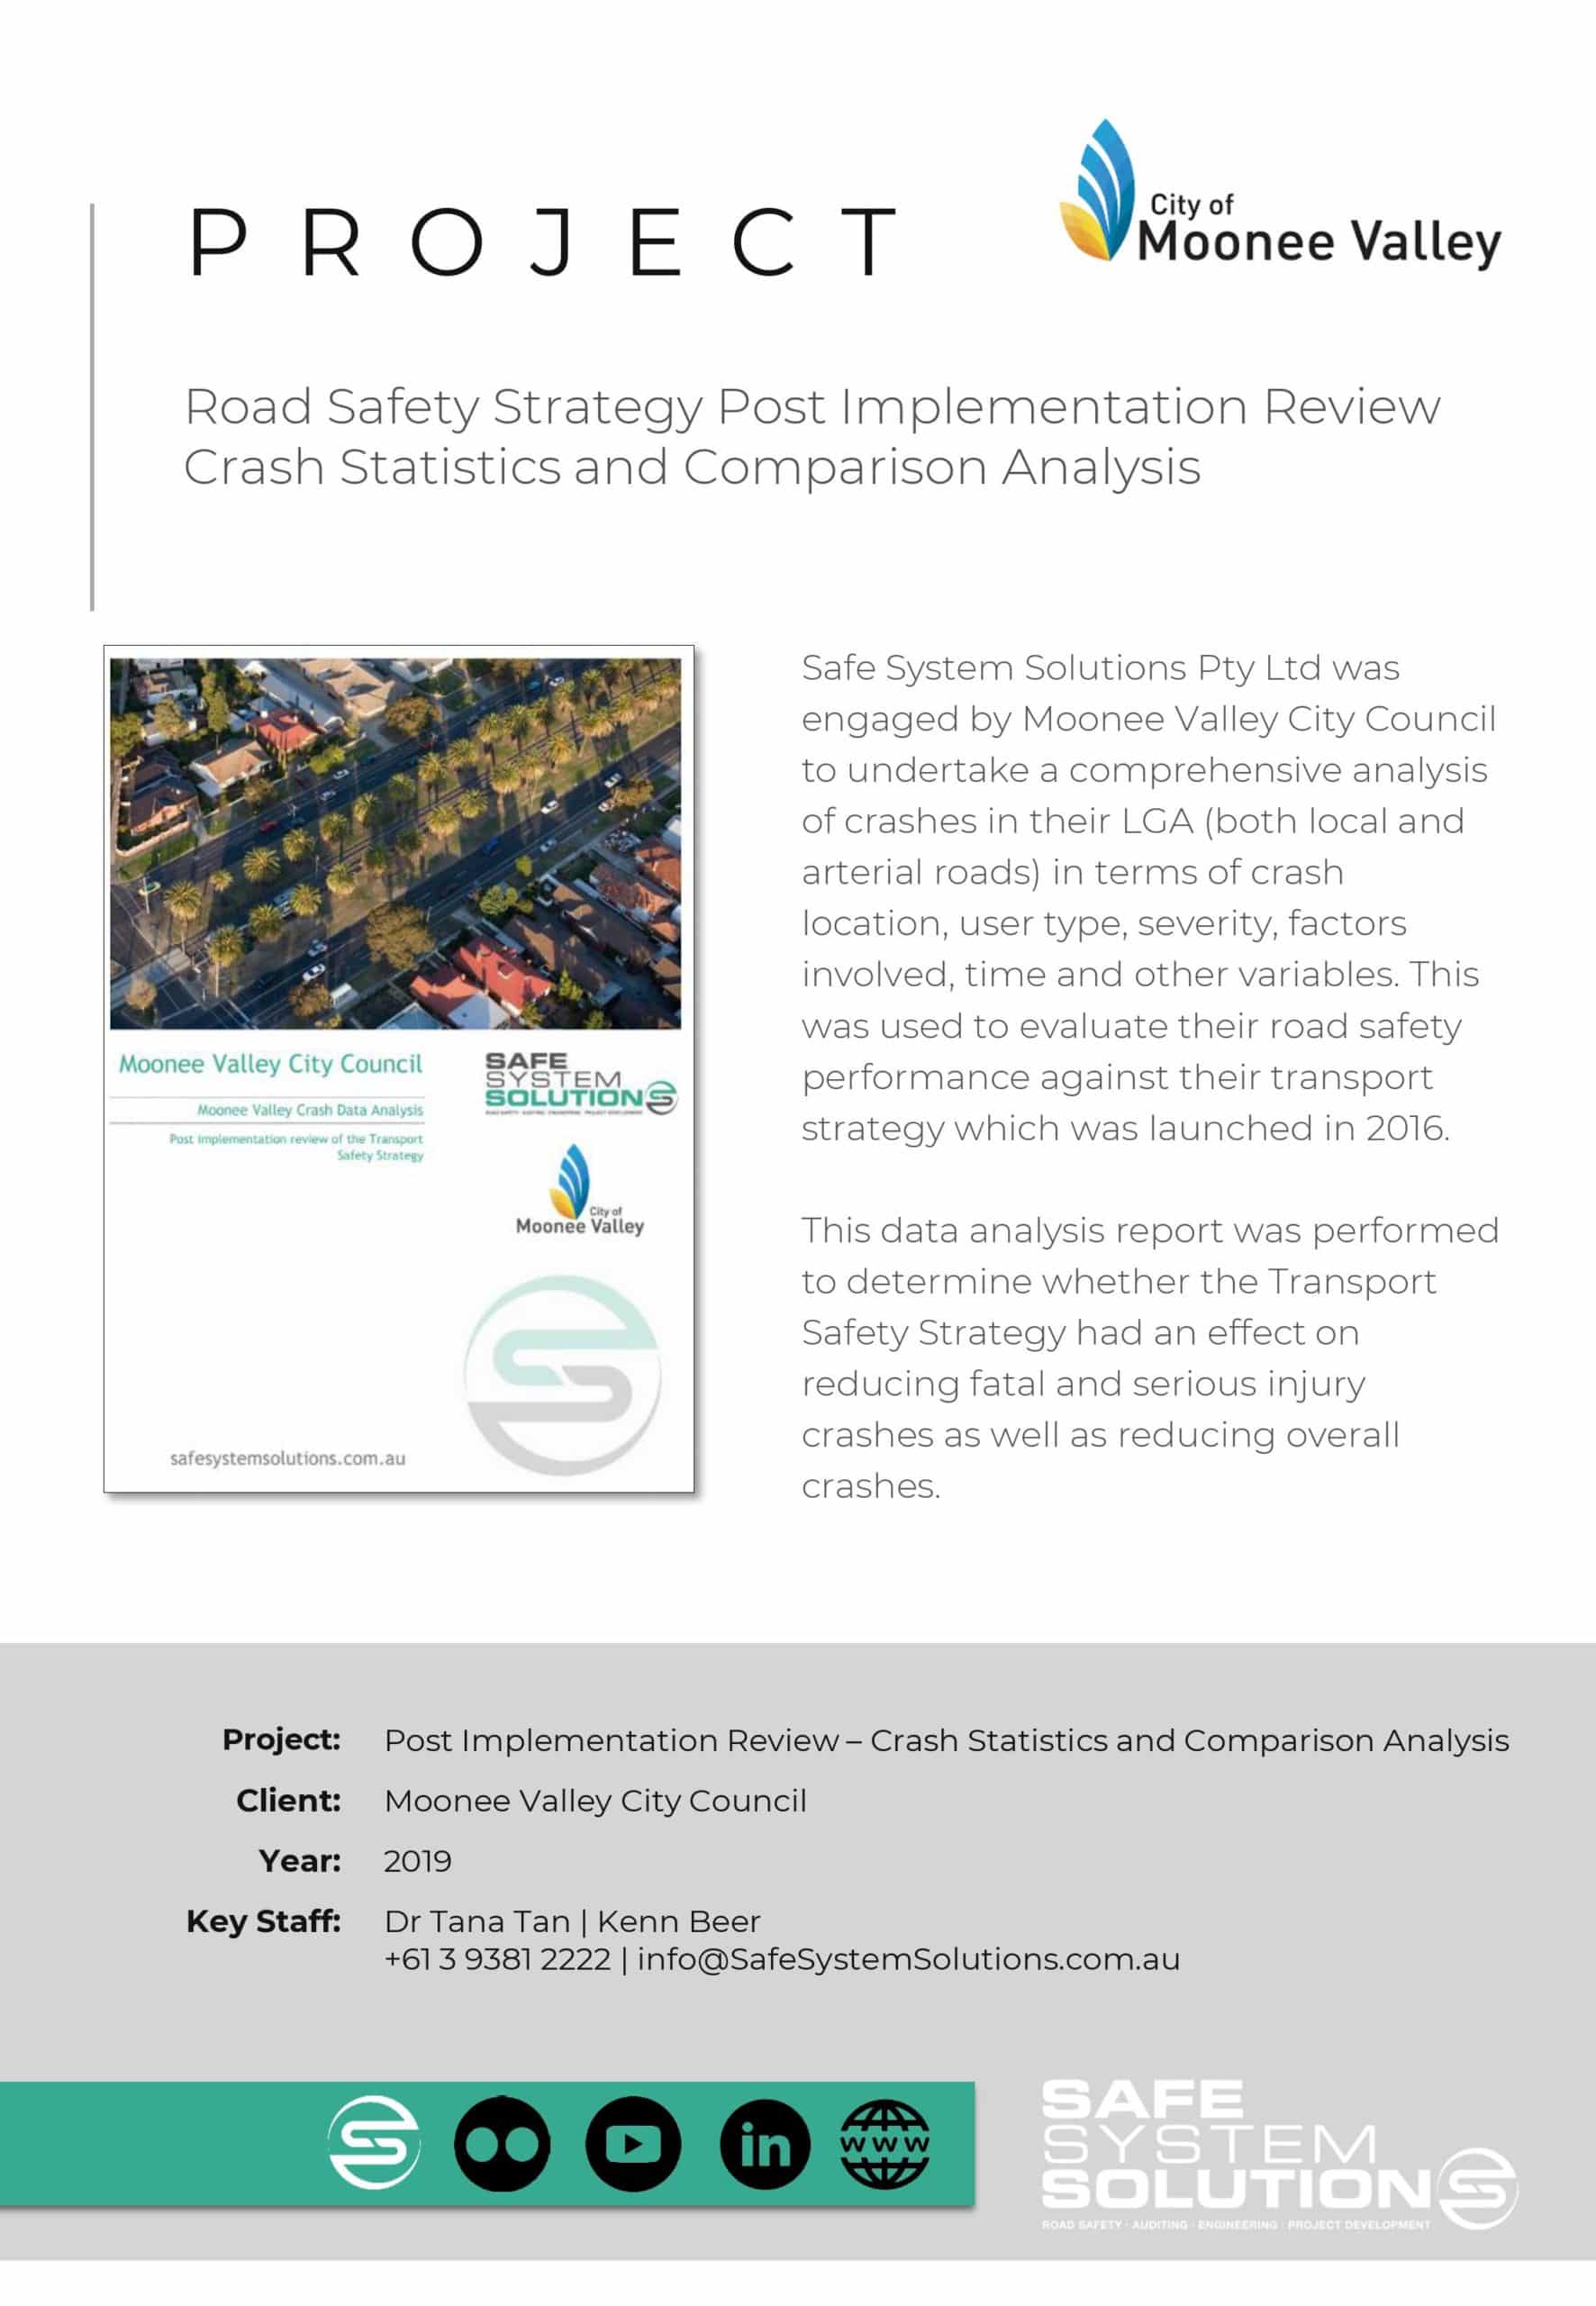 Road Safety Strategy Post Implementation Review Crash Statistics and Comparison Analysis